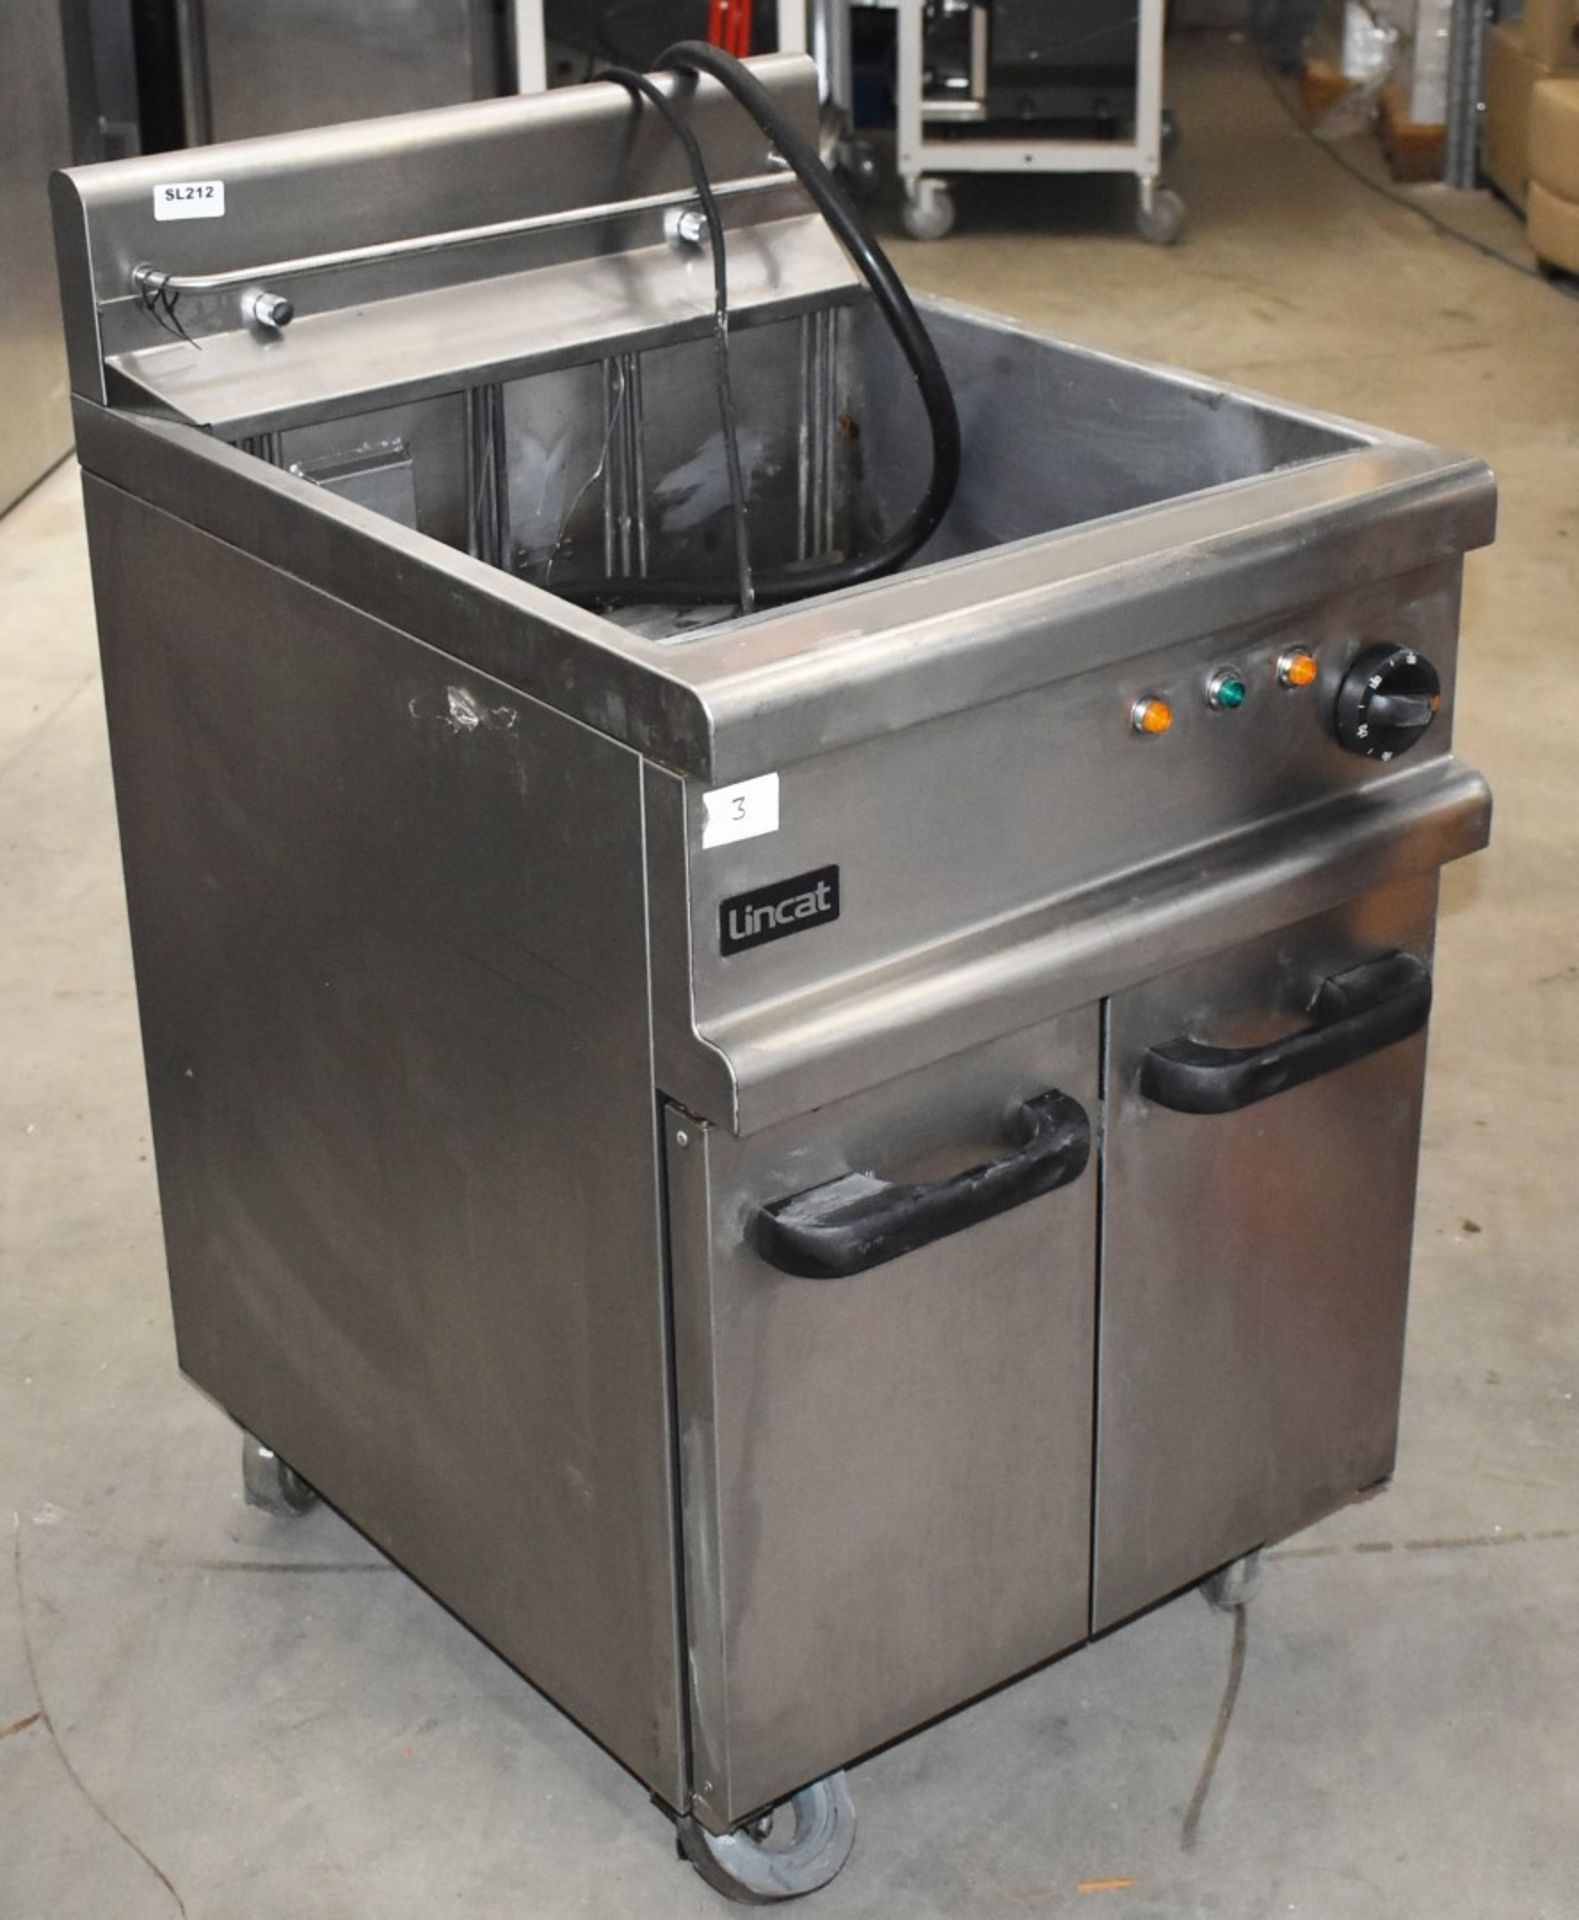 1 x Lincat Opus 700 Single Tank Electric Fryer With Built In Filtration - 3 Phase - Approx RRP £3, - Image 11 of 12